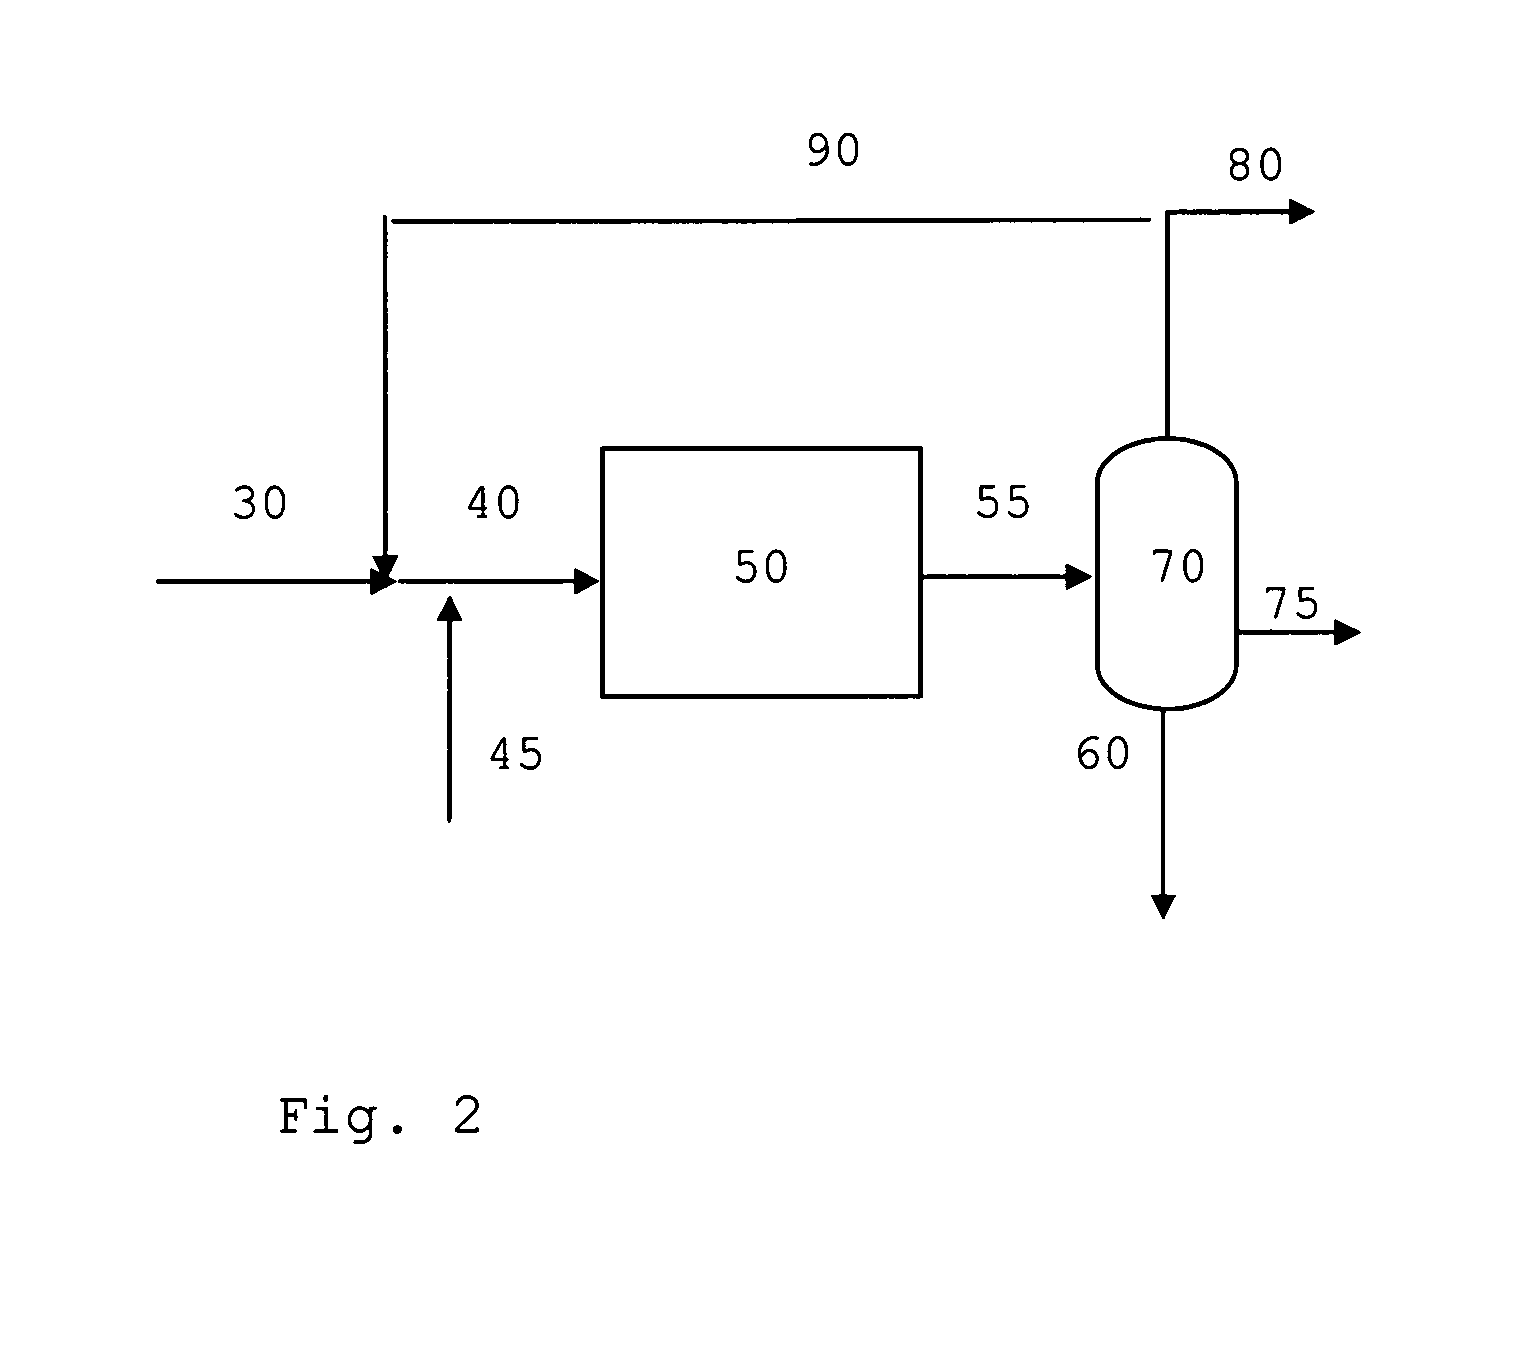 Process For Converting Difficultly Convertible Oxygenates to Gasoline